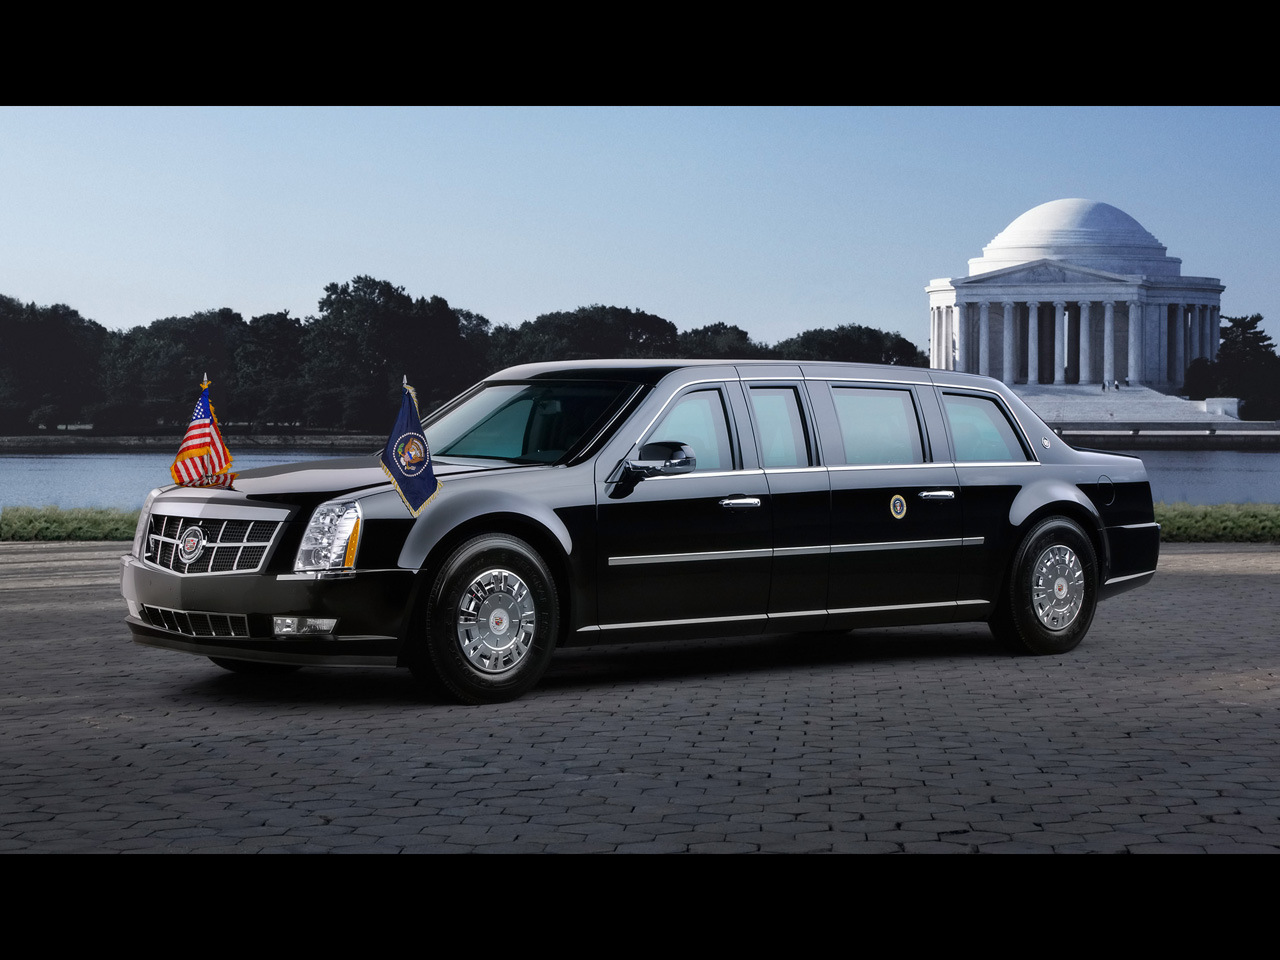 Car Pictures: Cadillac Presidential Limousine - 2009